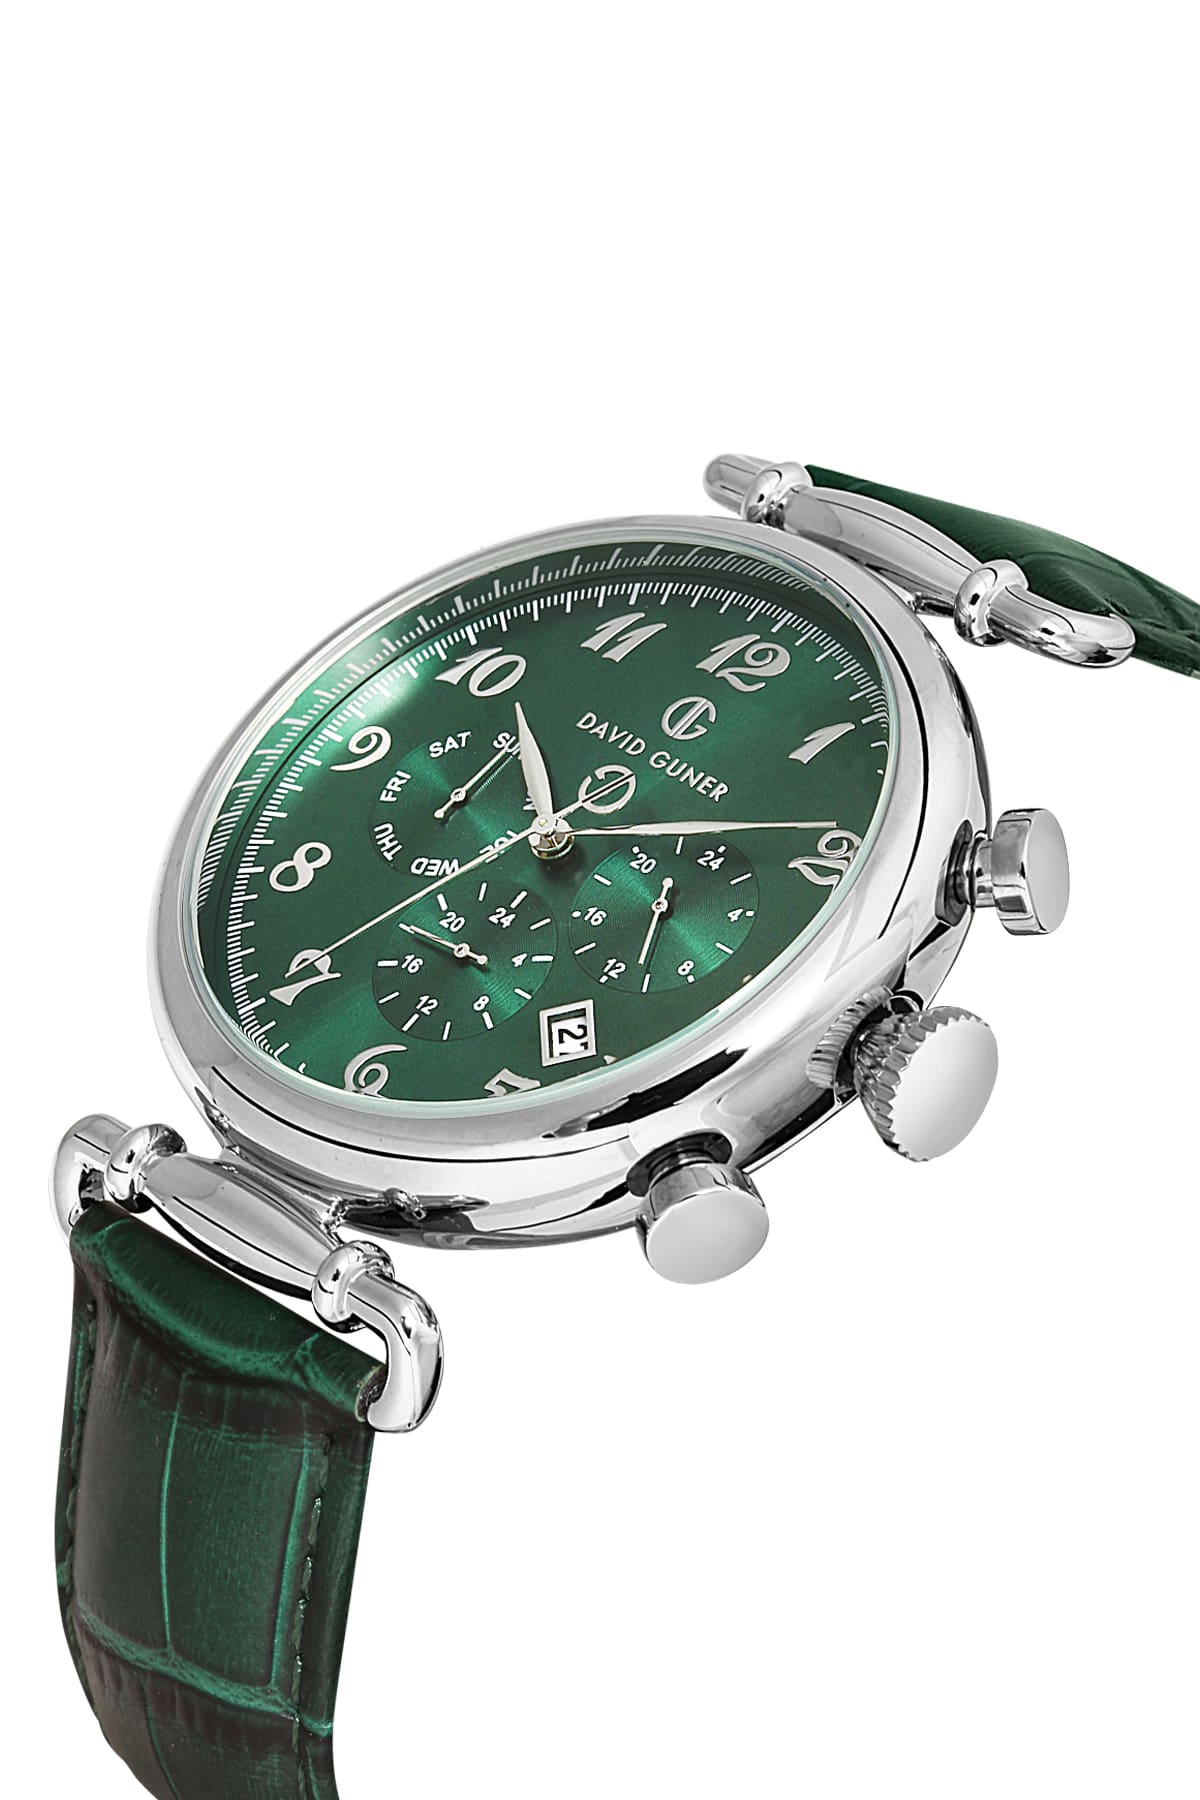 DAVID GUNER Silver Plated Green Dial Men's Wristwatch with Leather Strap